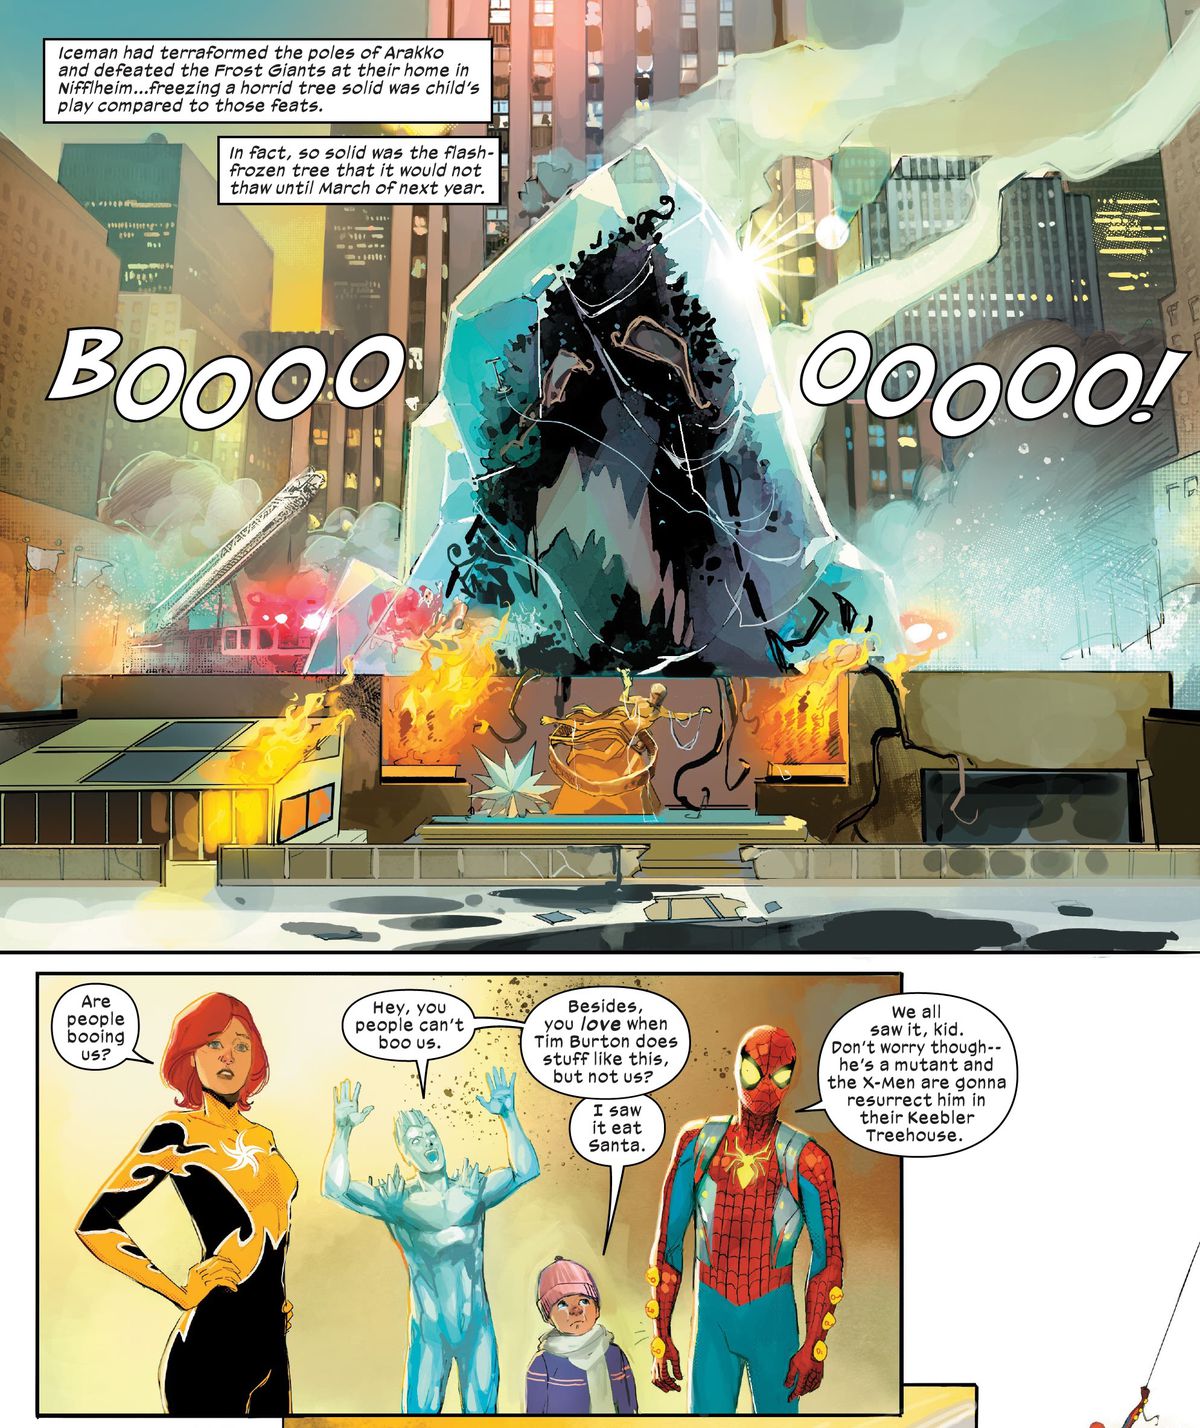 Iceman, Firestar, and Spider-Man observe their defeated enemy: The Rockefeller Center Christmas Tree, transformed into an evil monster, burnt to a crisp, and then frozen in a giant block of ice. “I saw it eat Santa,” says a small child. “We all saw it, kid,” says Spider-Man. “Don’t worry though — He’s a mutant and the X-Men are gonna resurrect him in their Keebler Treehouse,” in Dark Web: X-Men #1 (2022). 